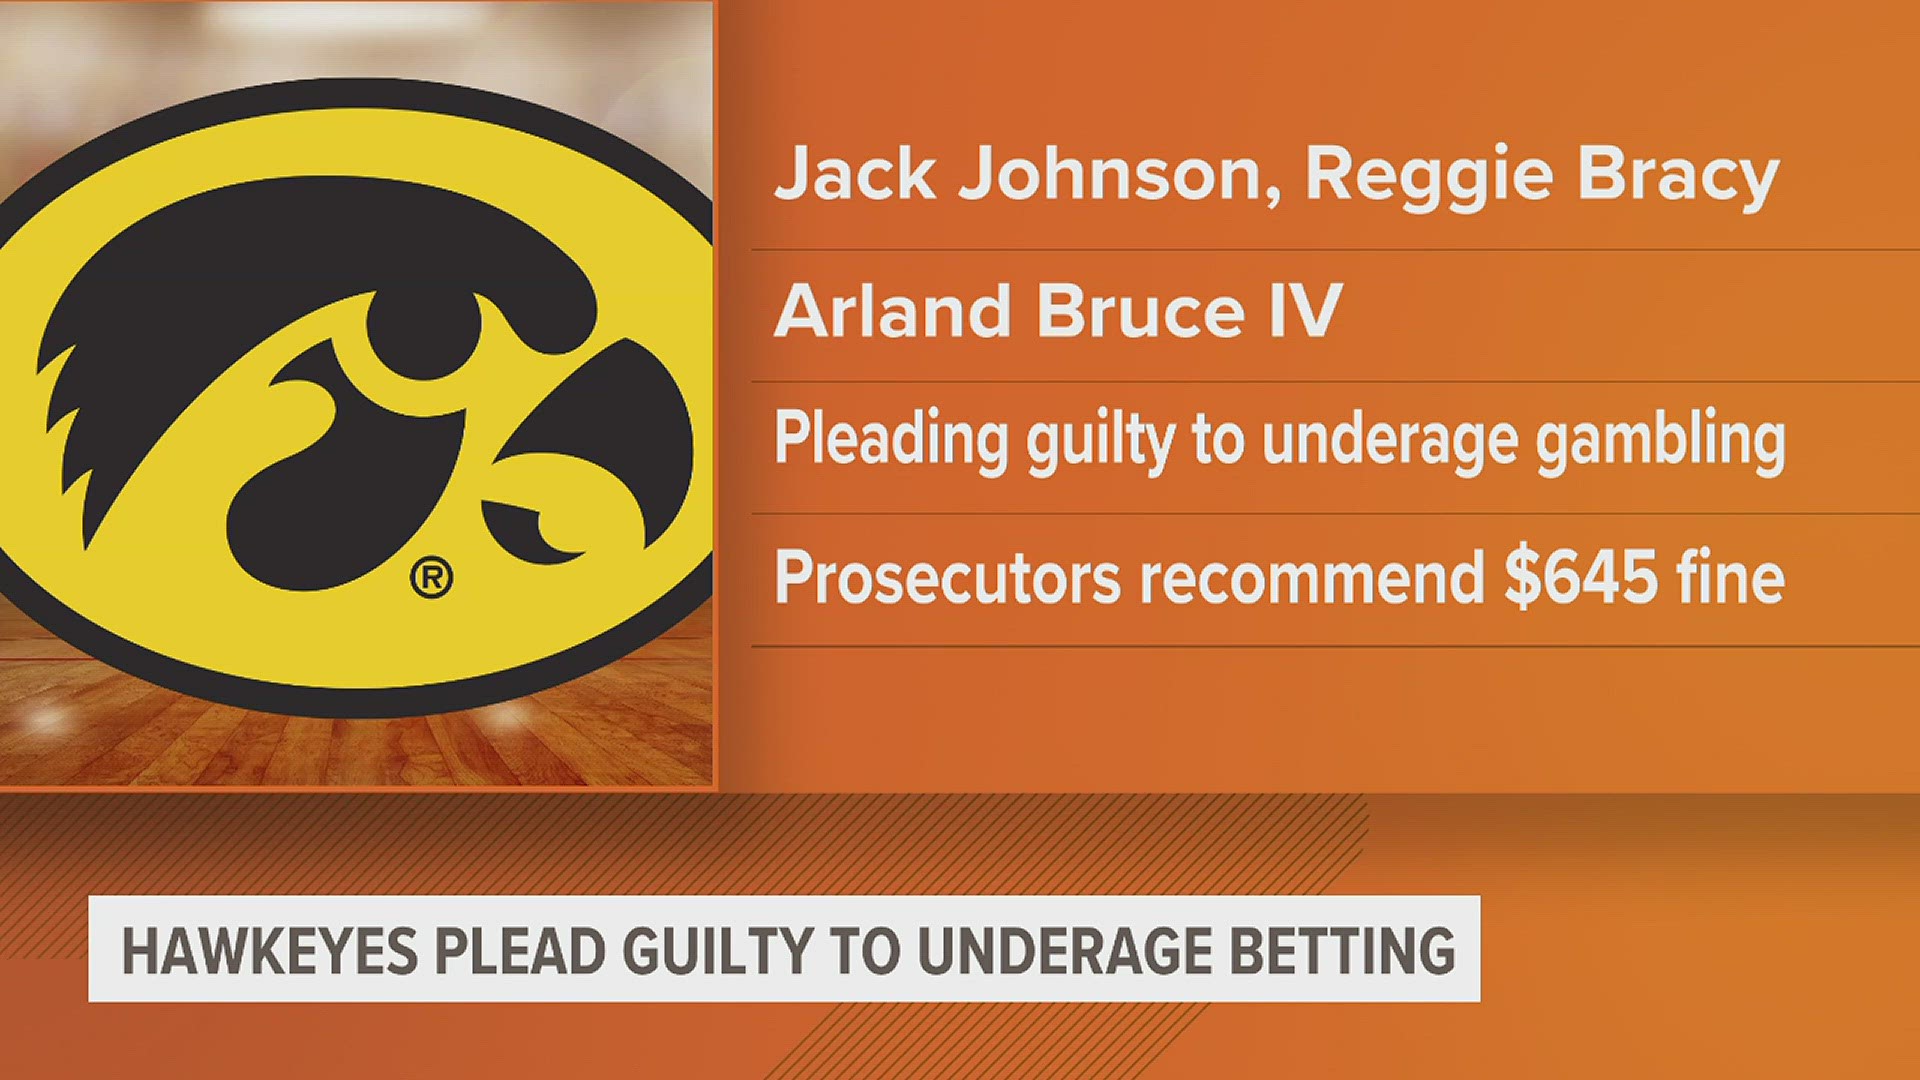 Jack Johnson, Arland Bruce IV, and Reggie Bracy have plead guilty to underage betting. Prosecutors recommend each player pay a $645 fine.